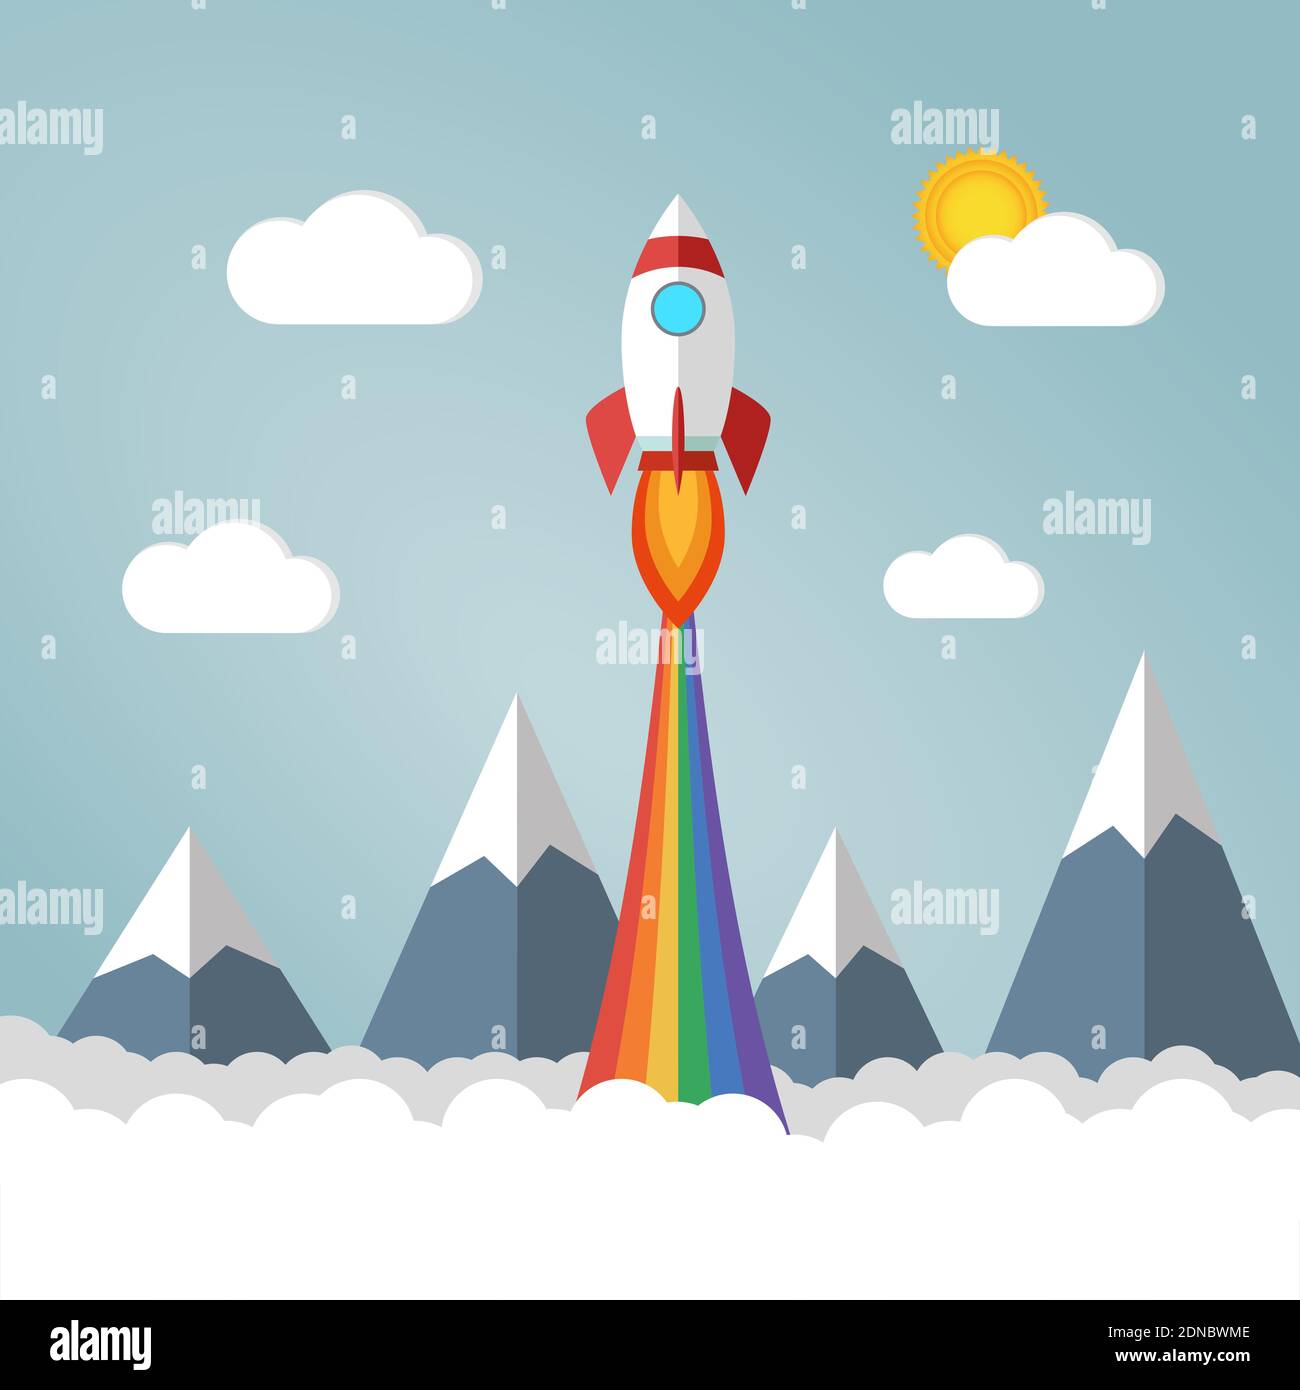 https://c8.alamy.com/comp/2DNBWME/rocket-launches-in-the-sky-flying-over-mounts-and-white-fluffy-clouds-and-emits-rainbow-colored-smoke-copy-space-for-design-or-text-2DNBWME.jpg